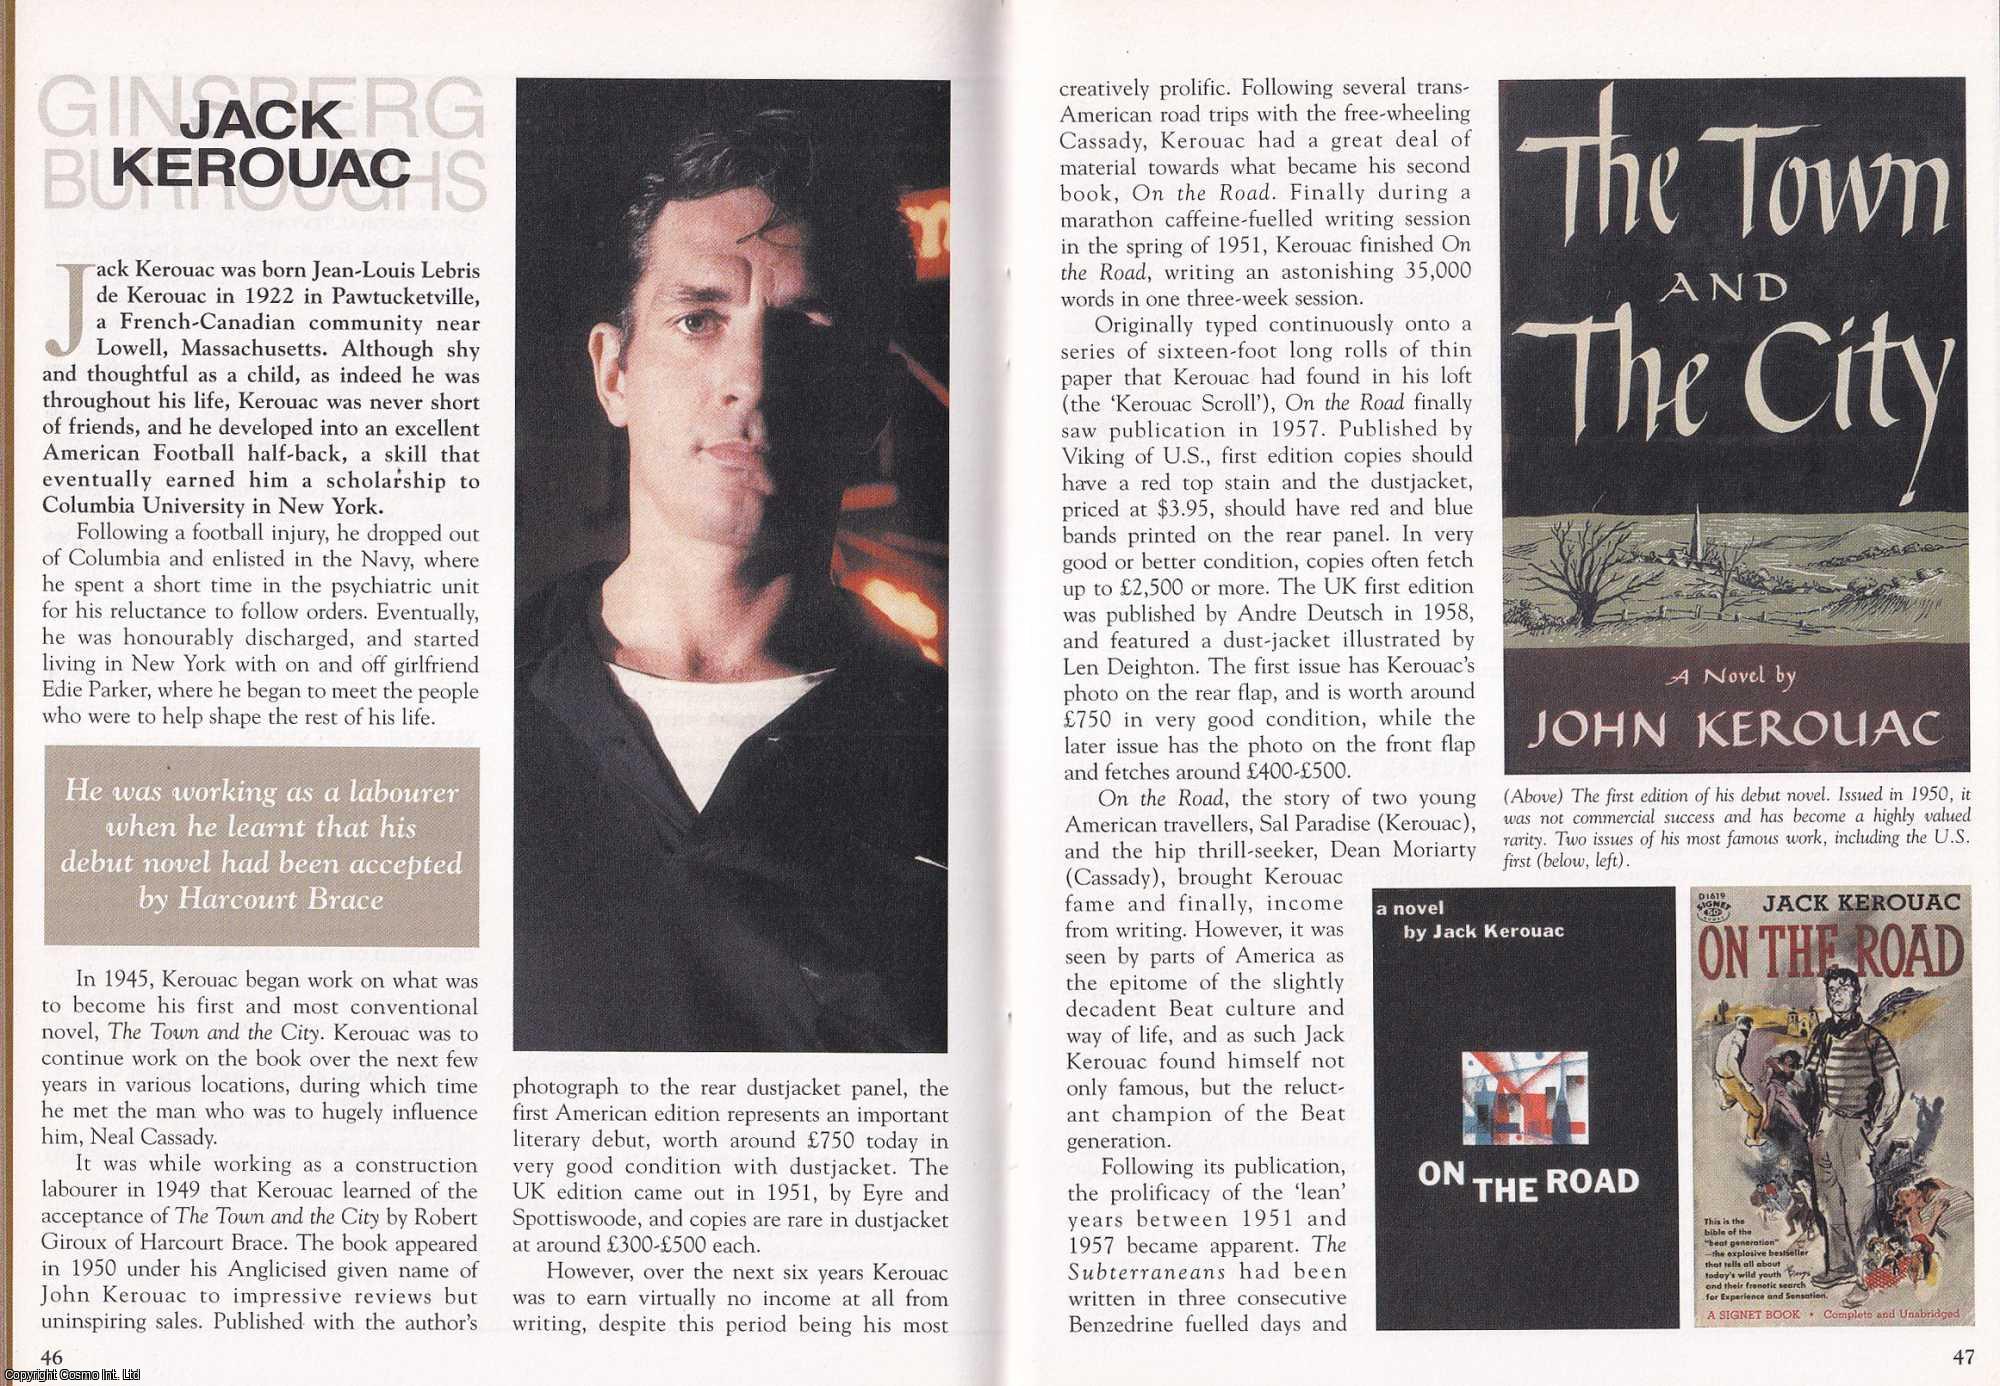 --- - Jack Kerouac. This is an original article separated from an issue of The Book & Magazine Collector publication.